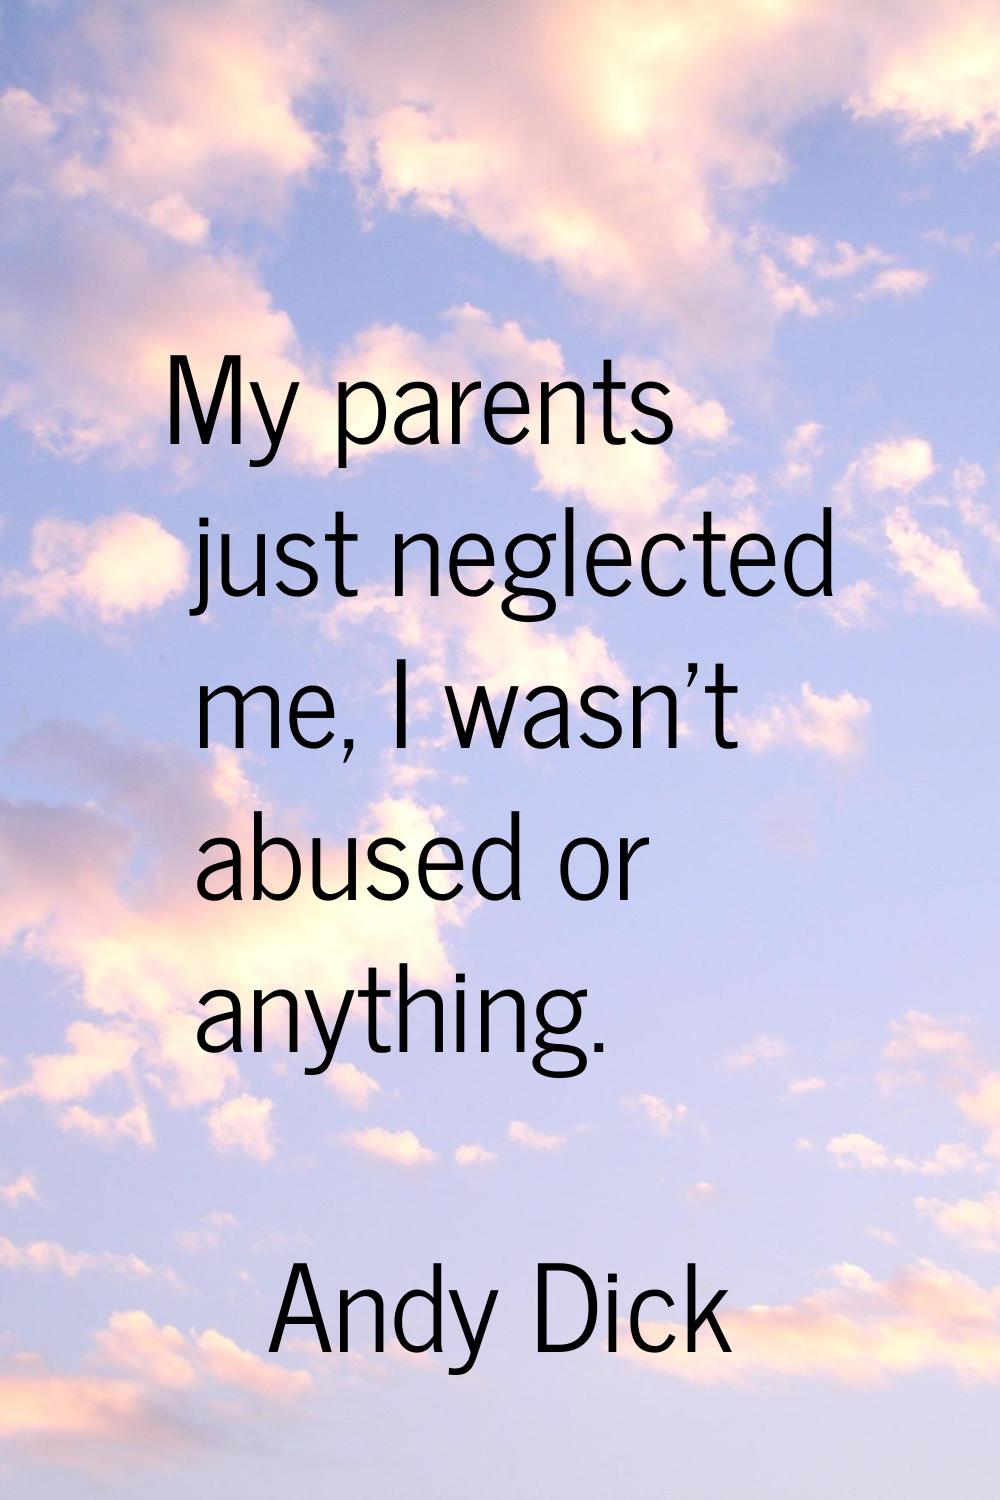 My parents just neglected me, I wasn't abused or anything.